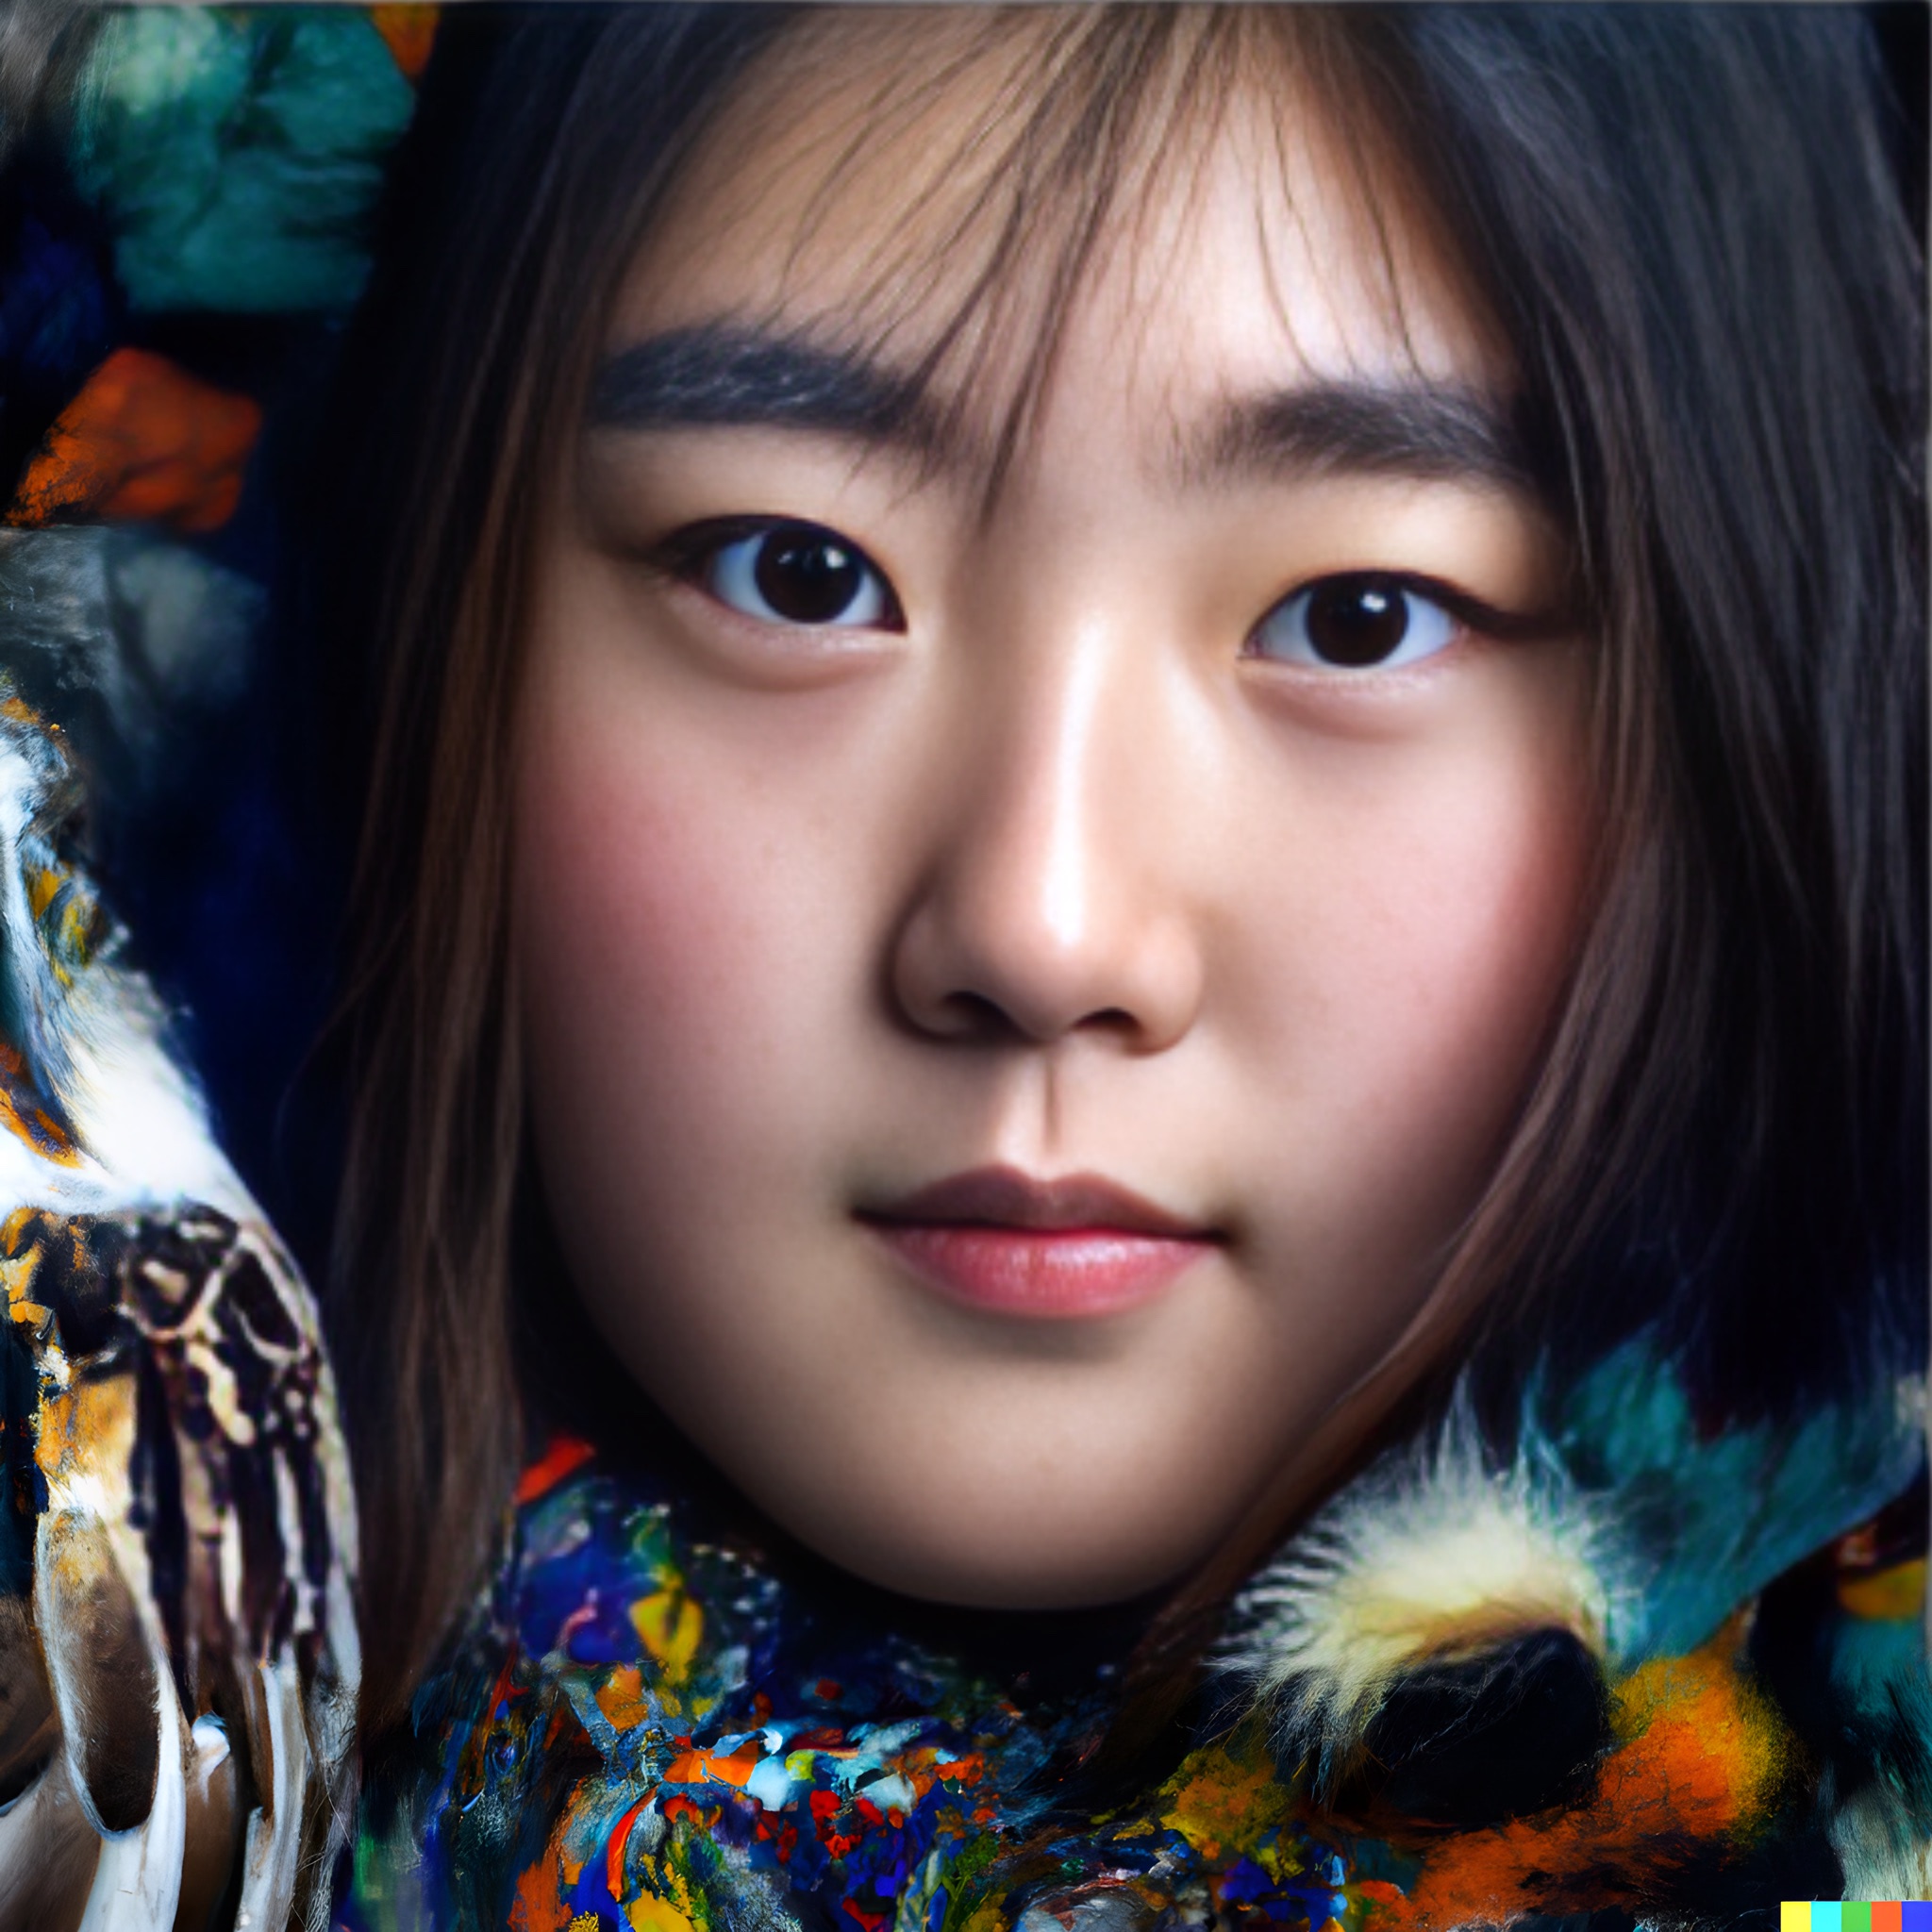 mongolian-girl-with-a-coat-made-of-the-colorful-feathers-3